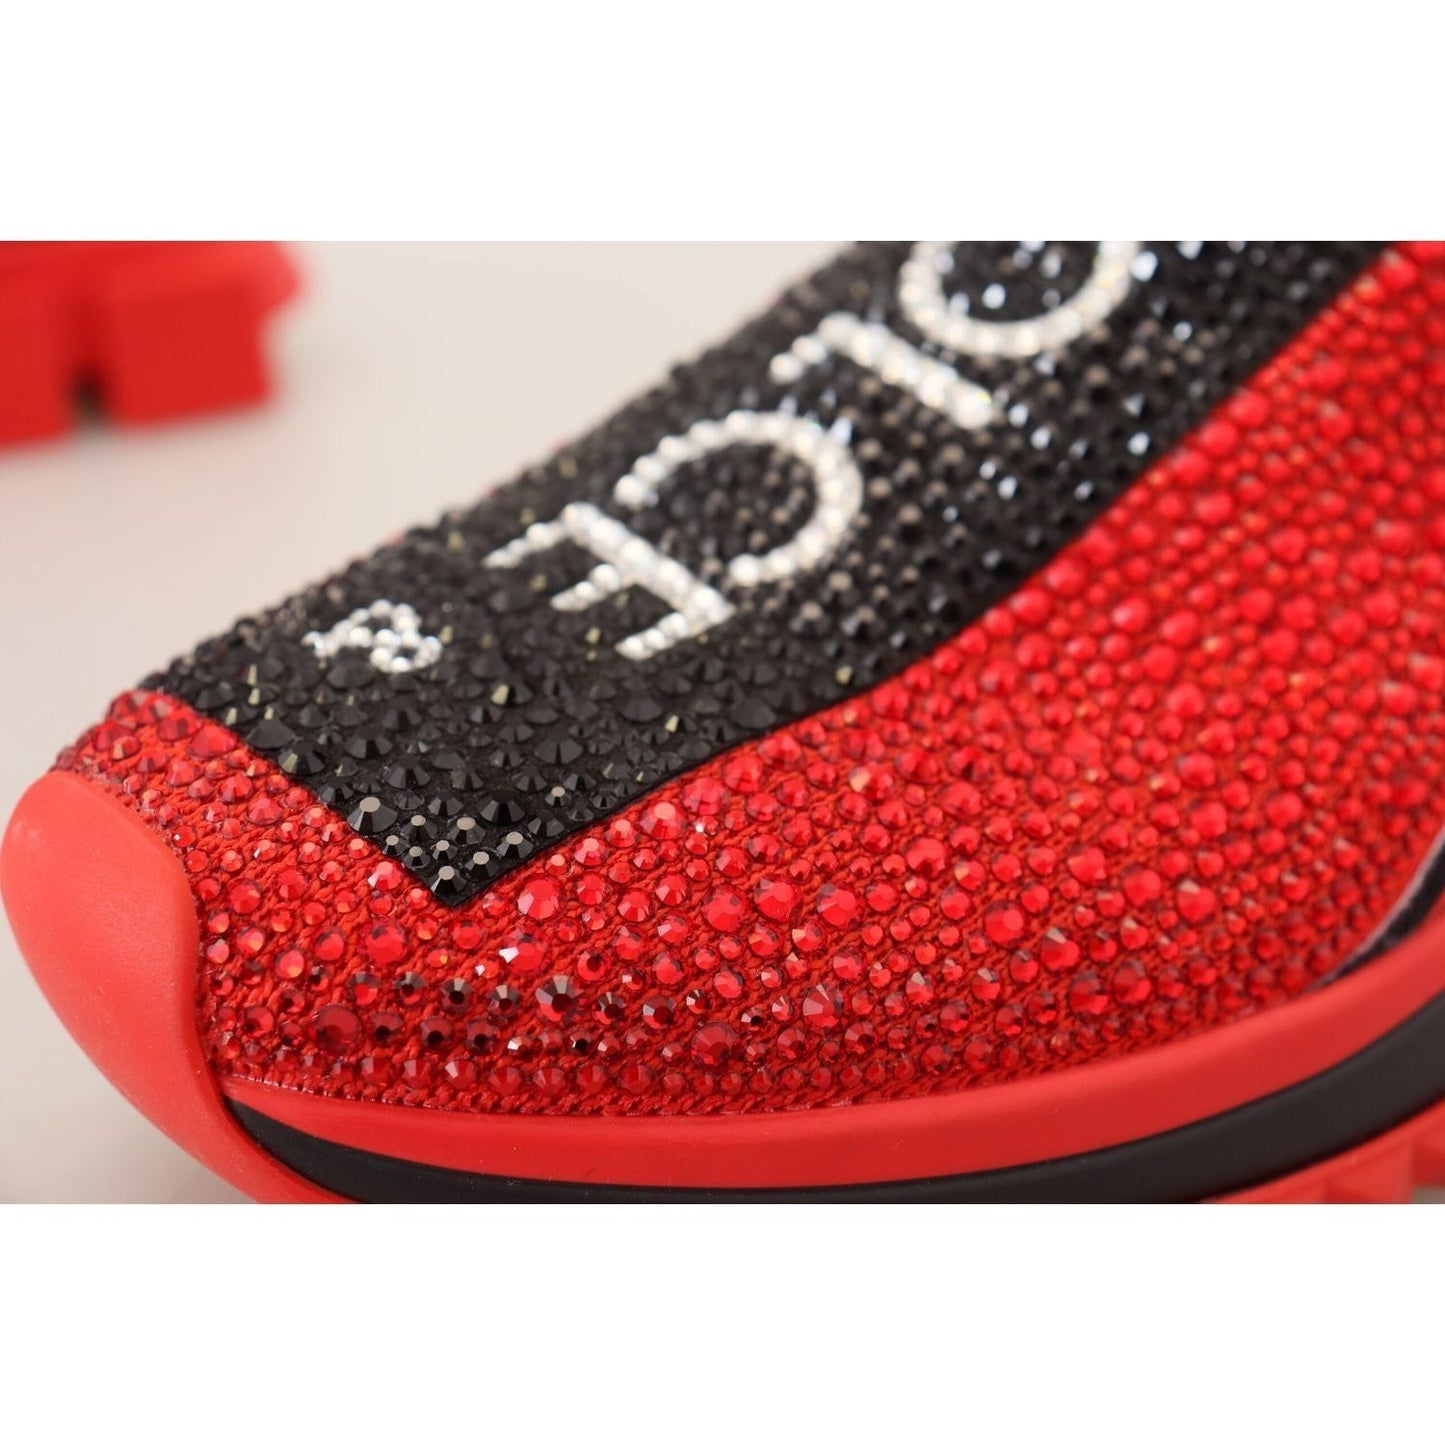 Dolce & Gabbana Exquisite Red Sorrento Slip-On Sneakers red-bling-sorrento-sneakers-socks-shoes